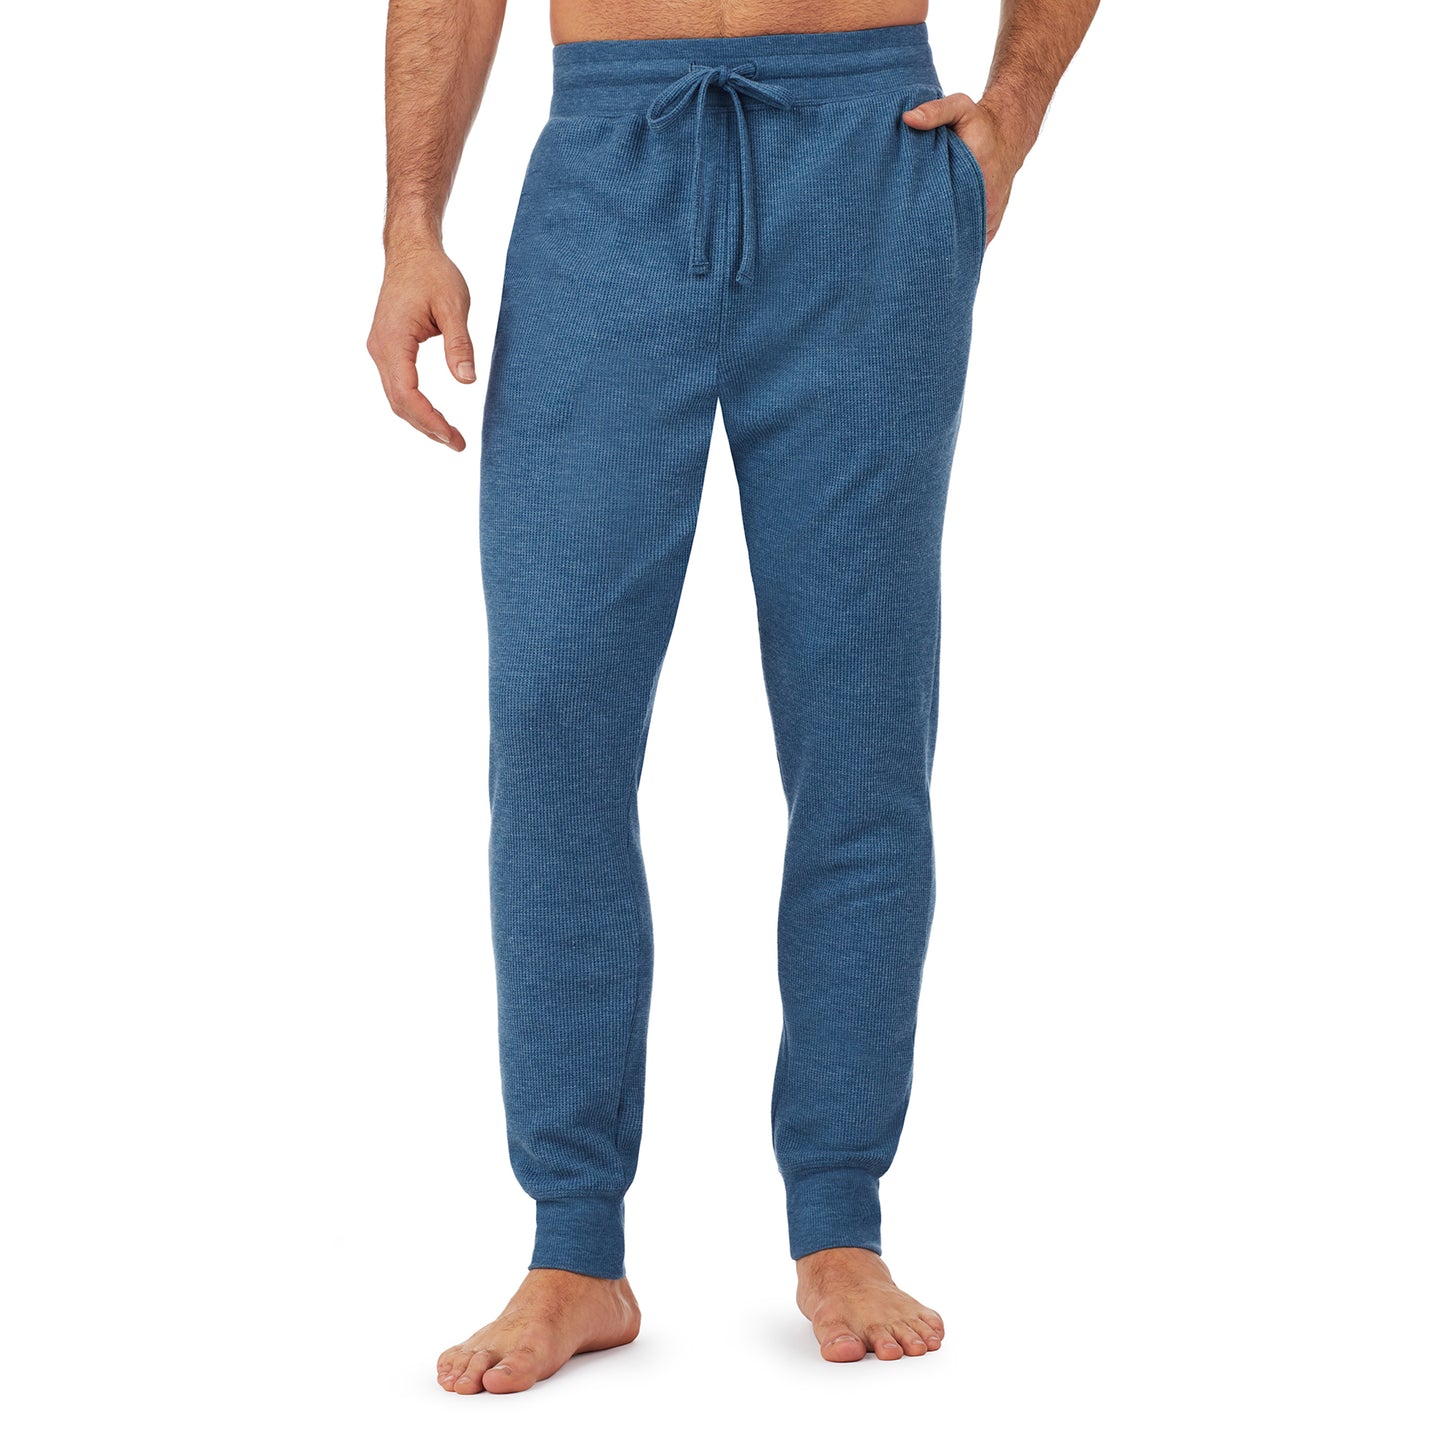 Blue Heather; Model is wearing size M. He is 6'1", Waist 31", Inseam 33". @A man wearing a blue heather waffle thermal relaxed jogger pant.